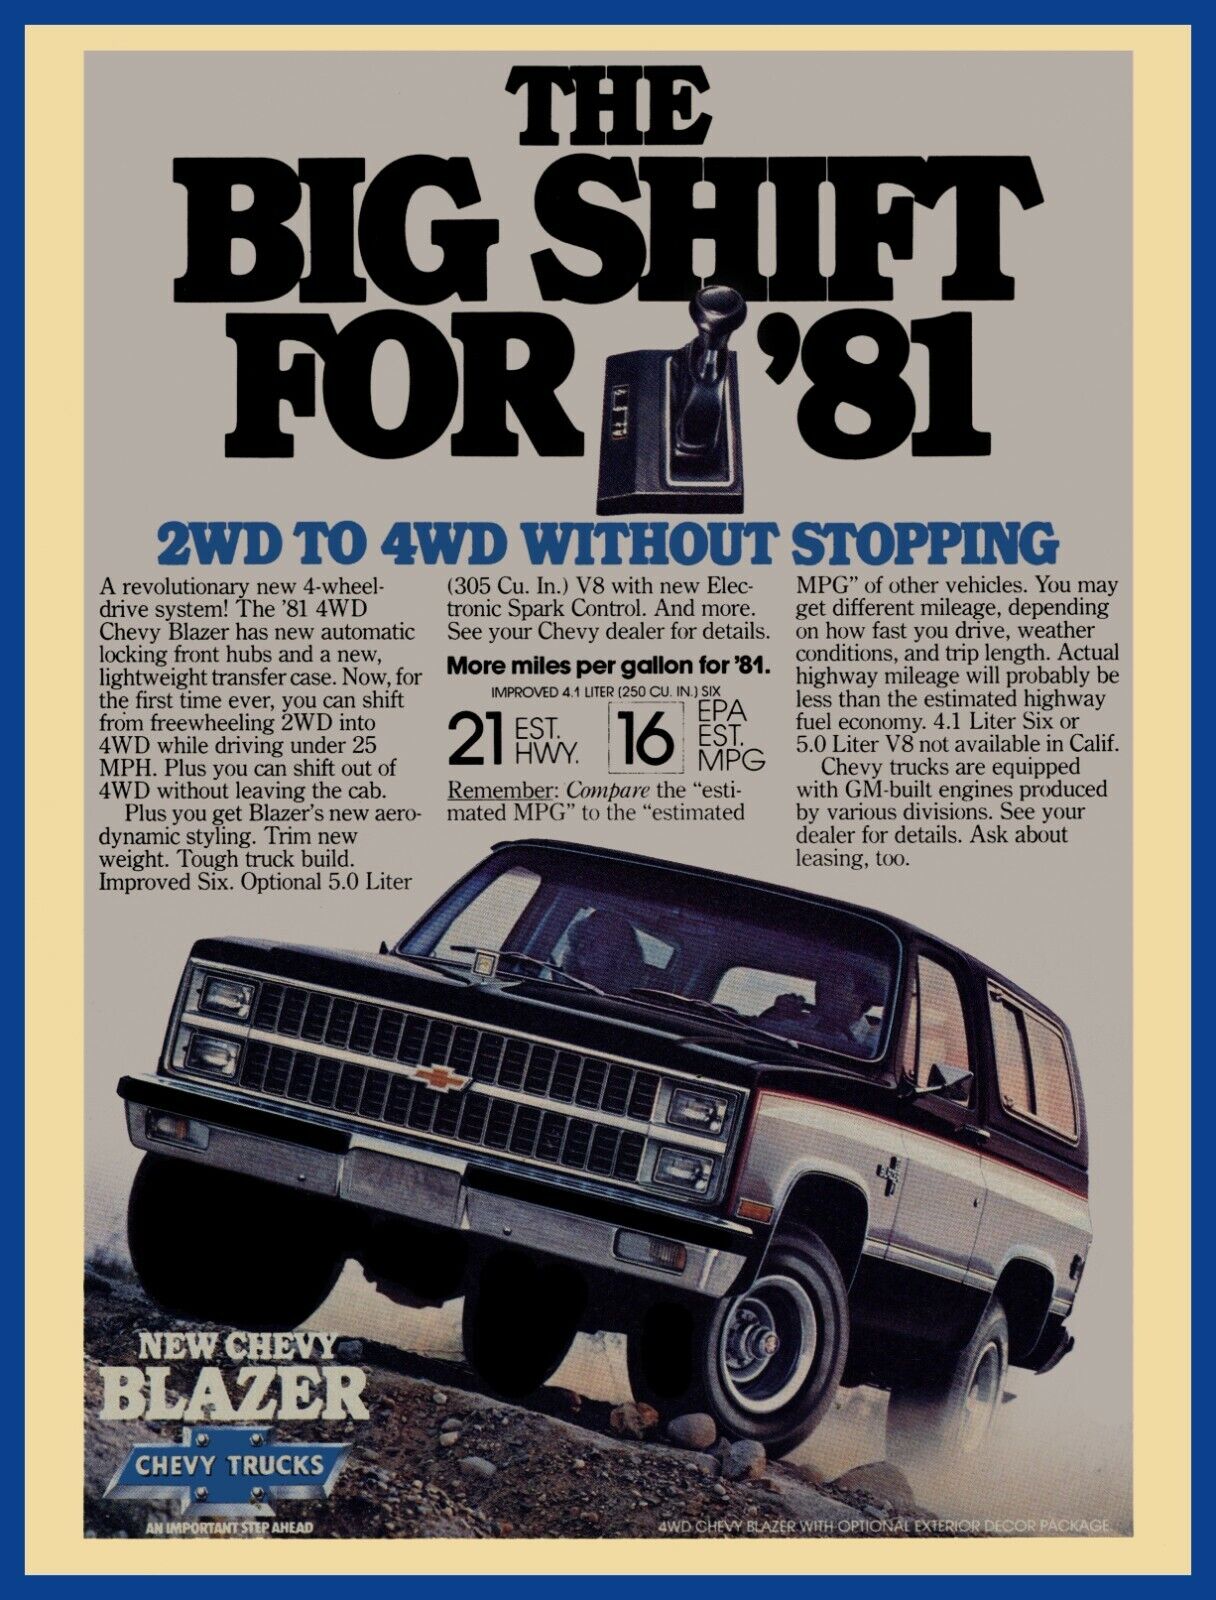 1981 Chevrolet Blazer New Metal Sign: "the Big Shift For 1981"